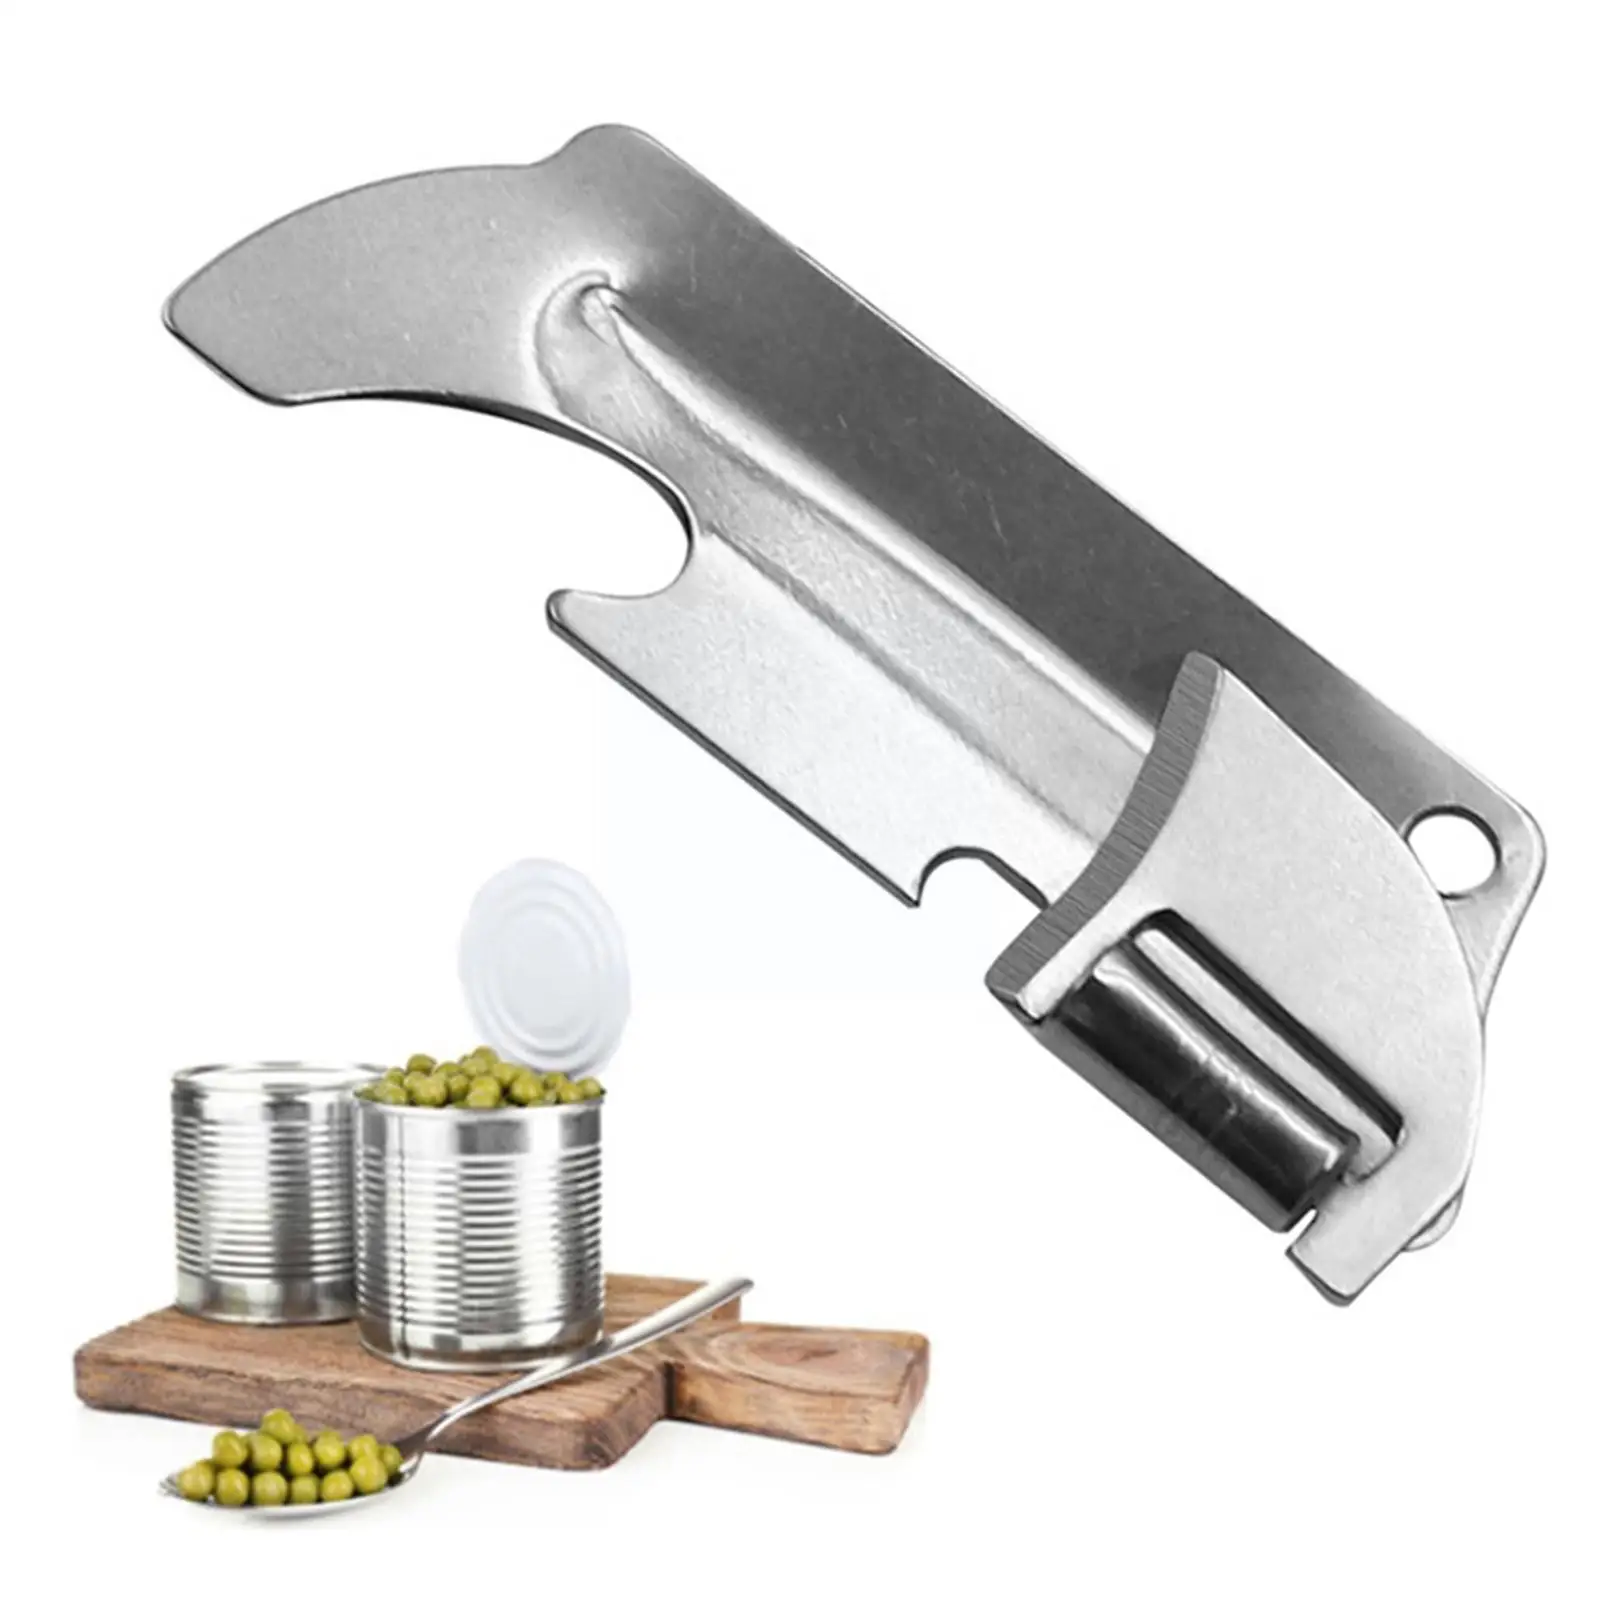 

Polished Stainless Steel Finishwith The Utili-key Stainless Can Opener Steel Opener Tool Multi-function Folding Opener Mini V1D7